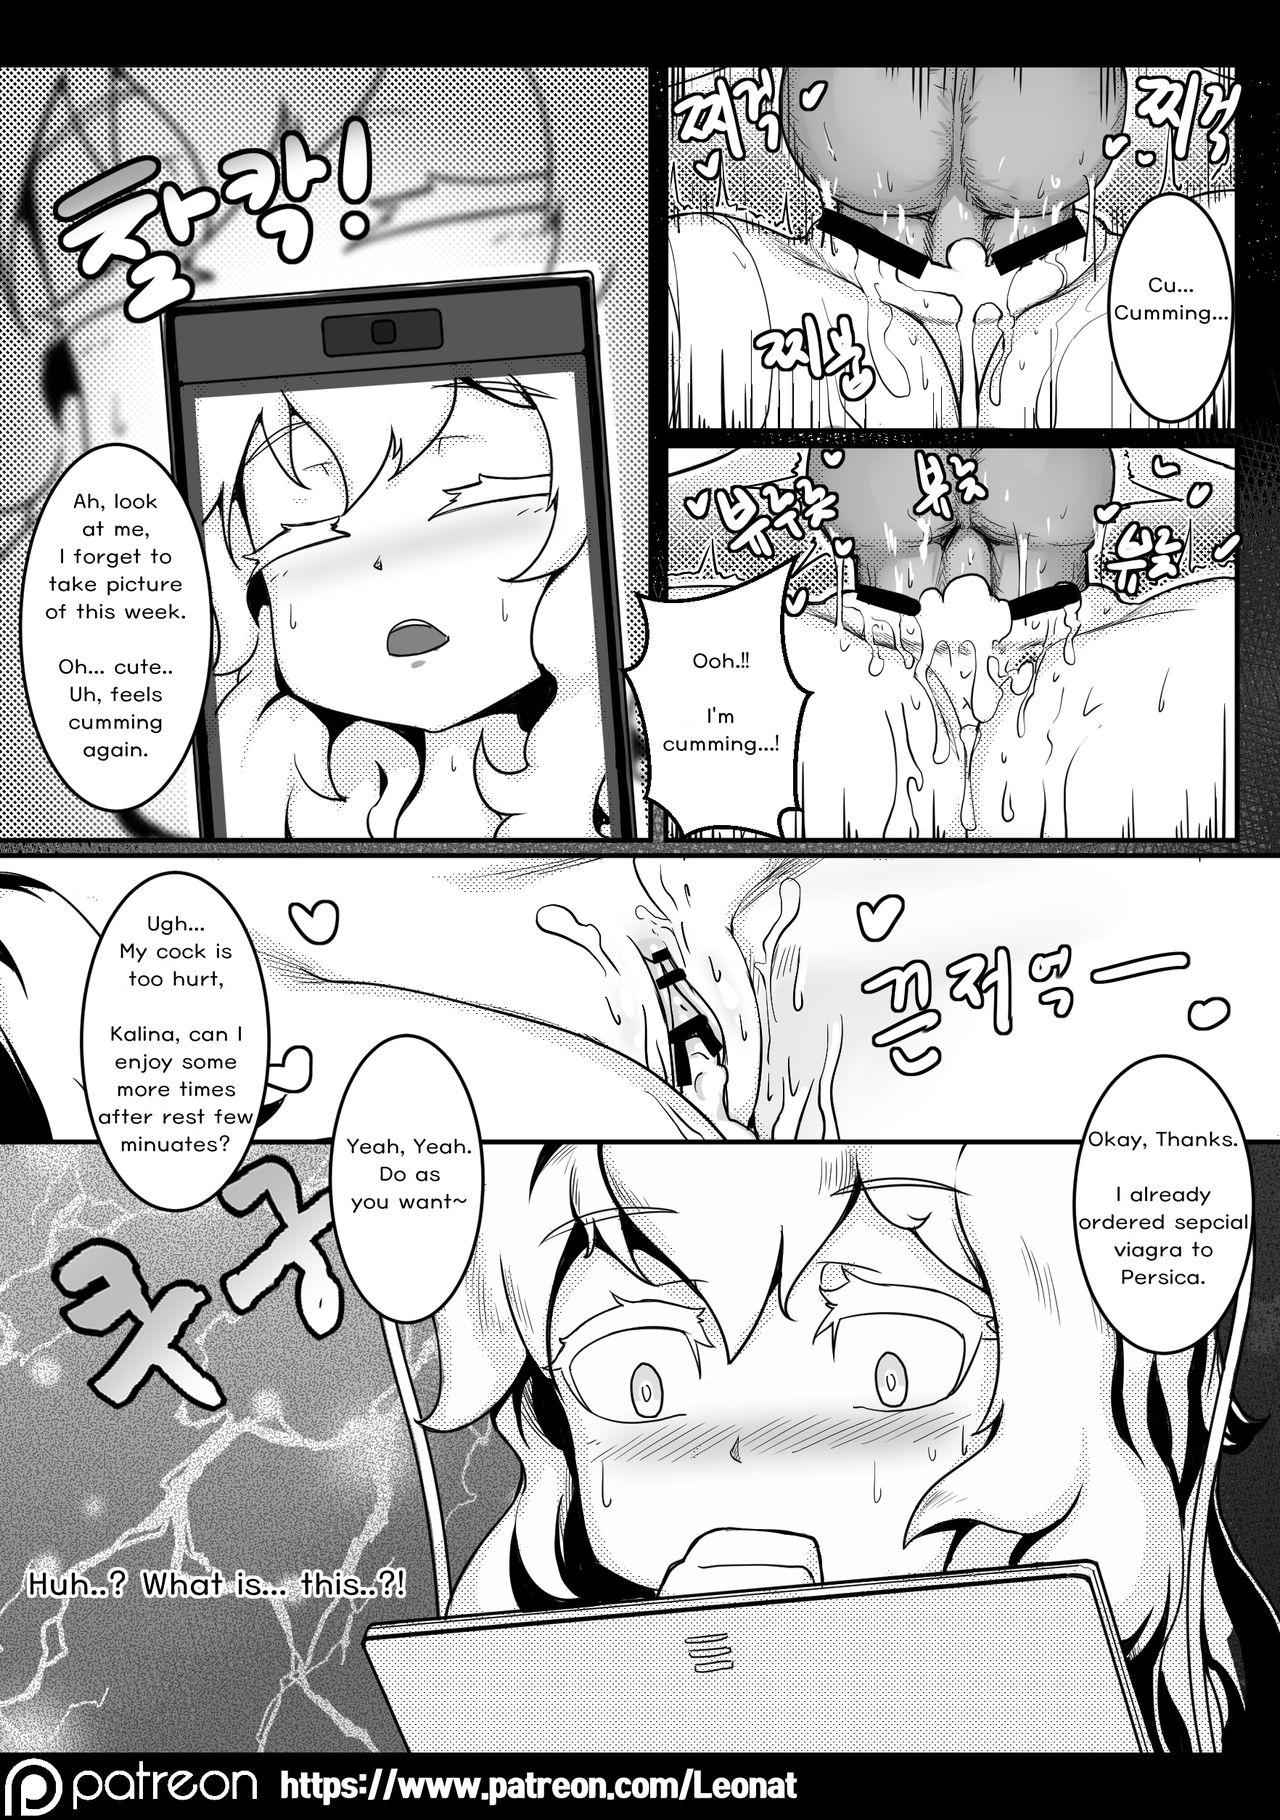 Com Lounge of HQ vol.3 - Girls frontline Tittyfuck - Page 5